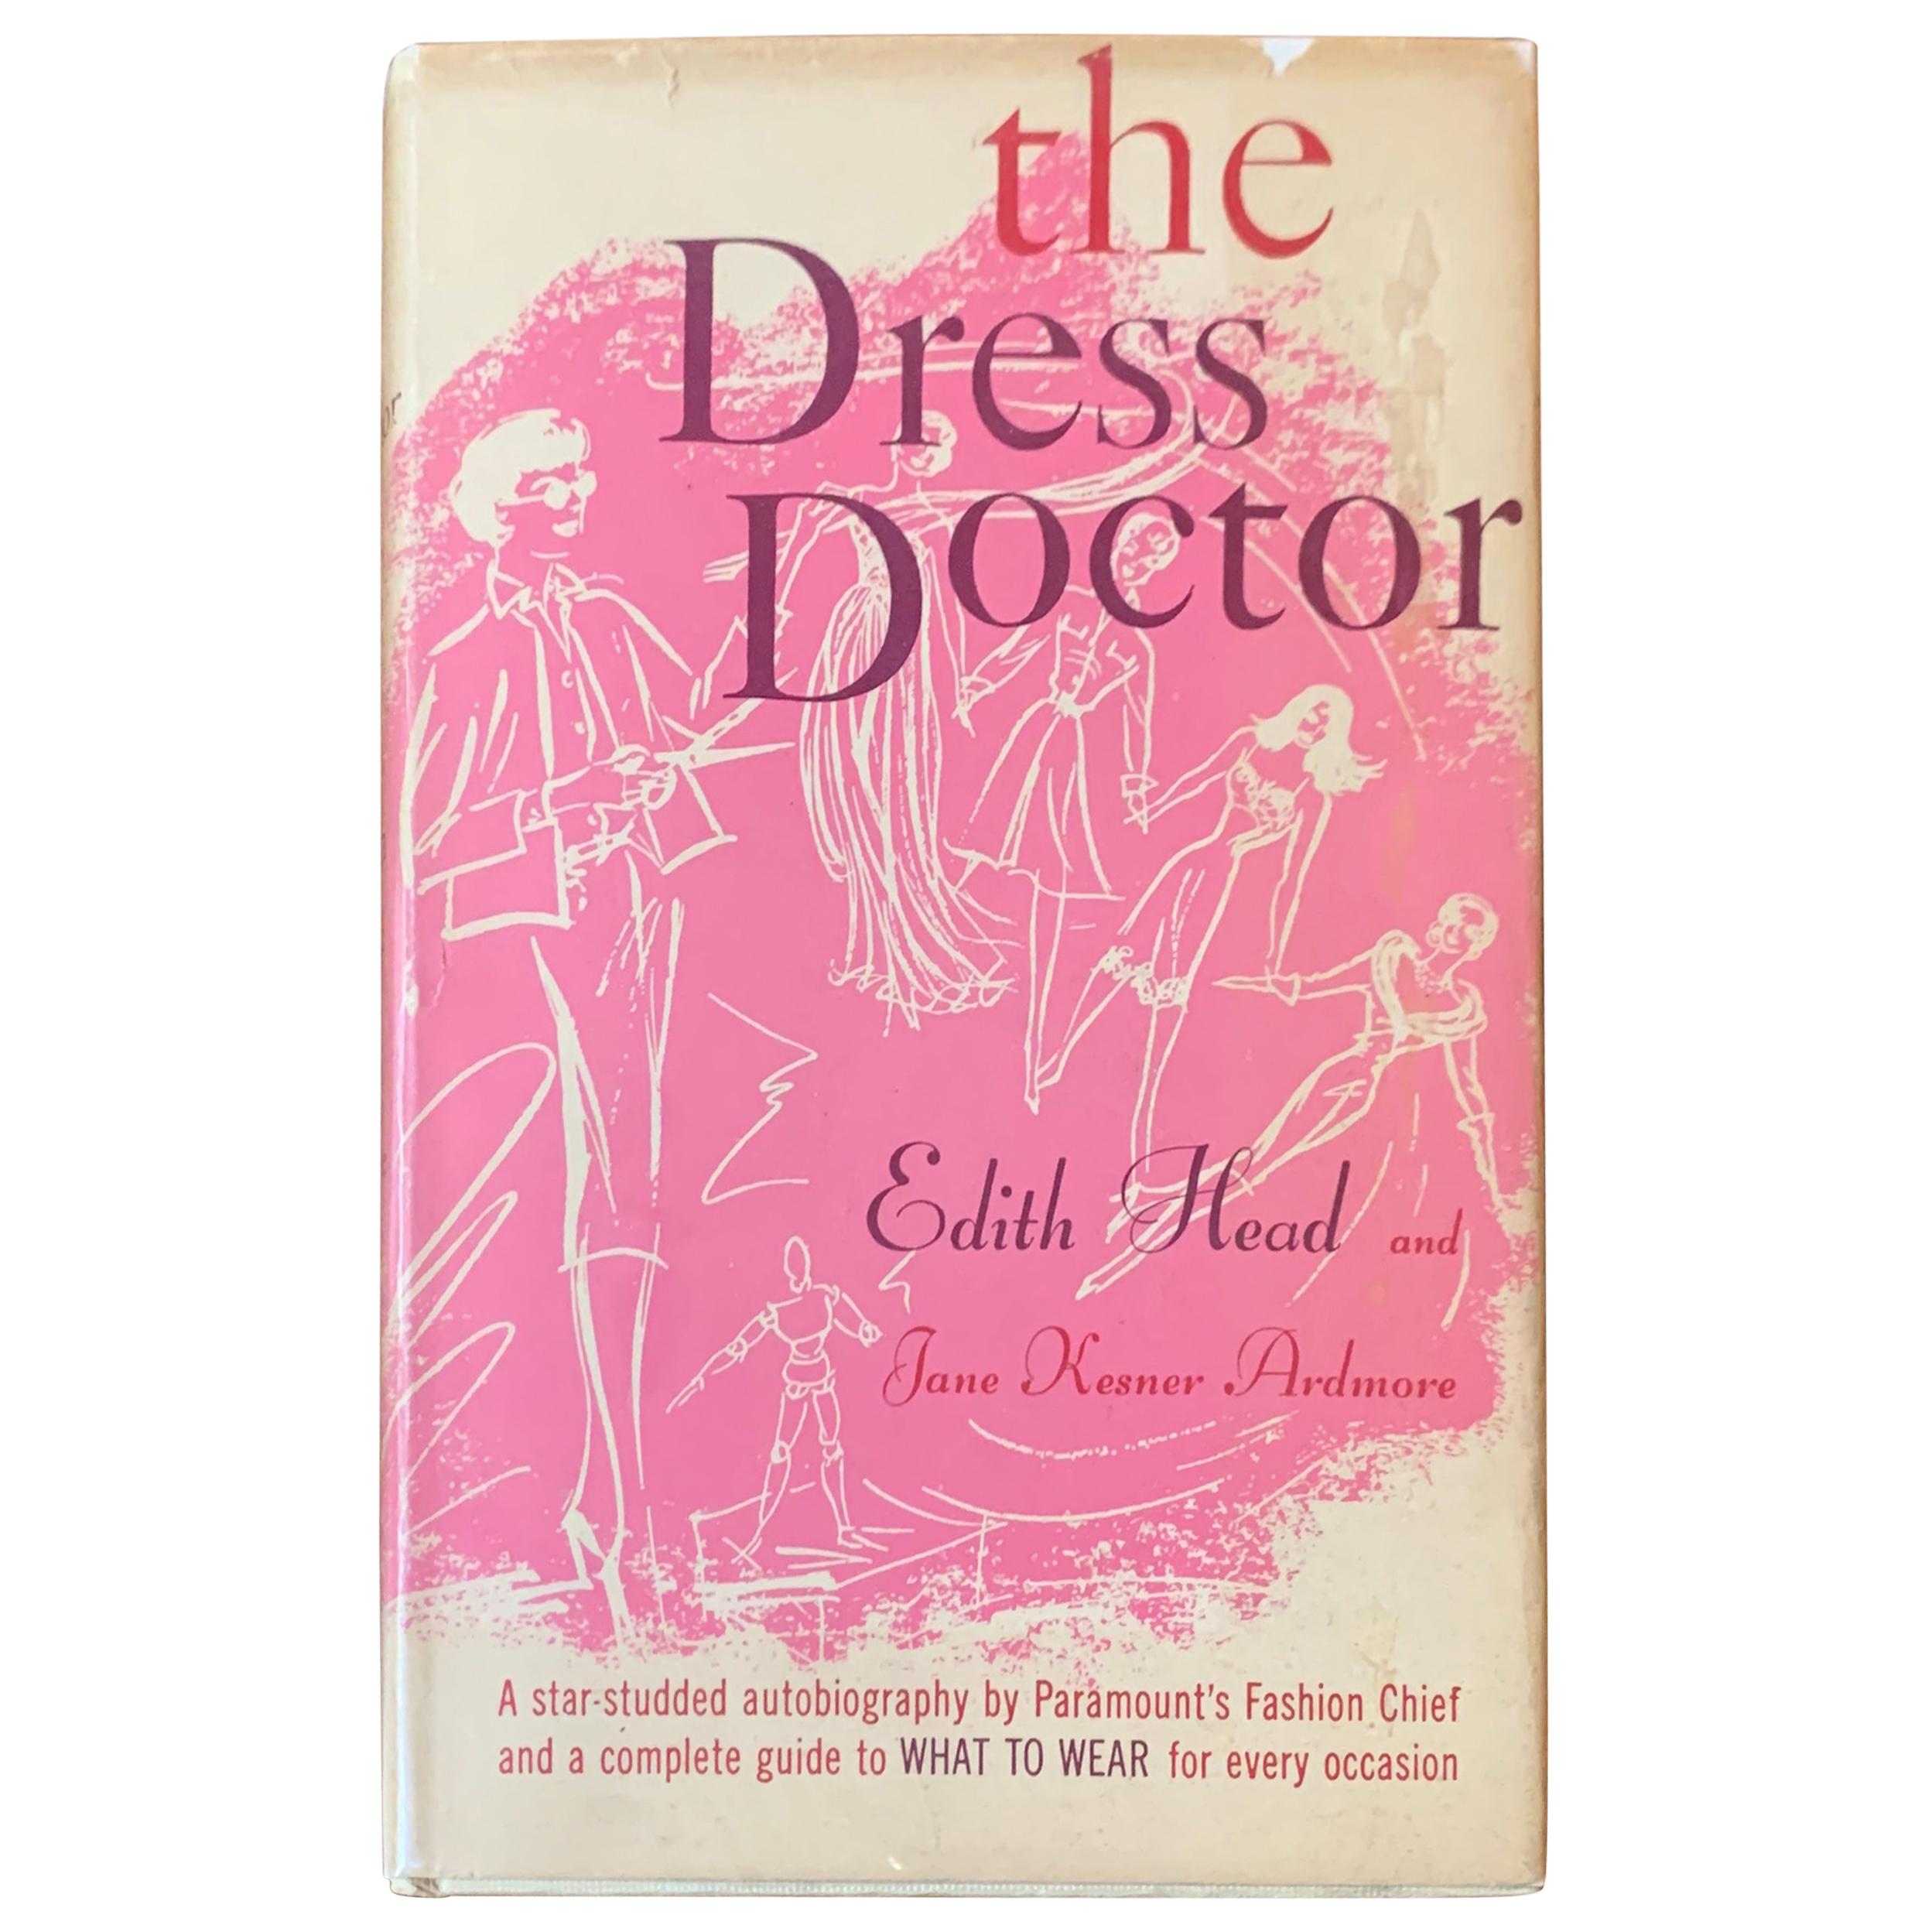 The Dress Doctor by Edith Head Uncommon First Edition Hardcover Fashion Book